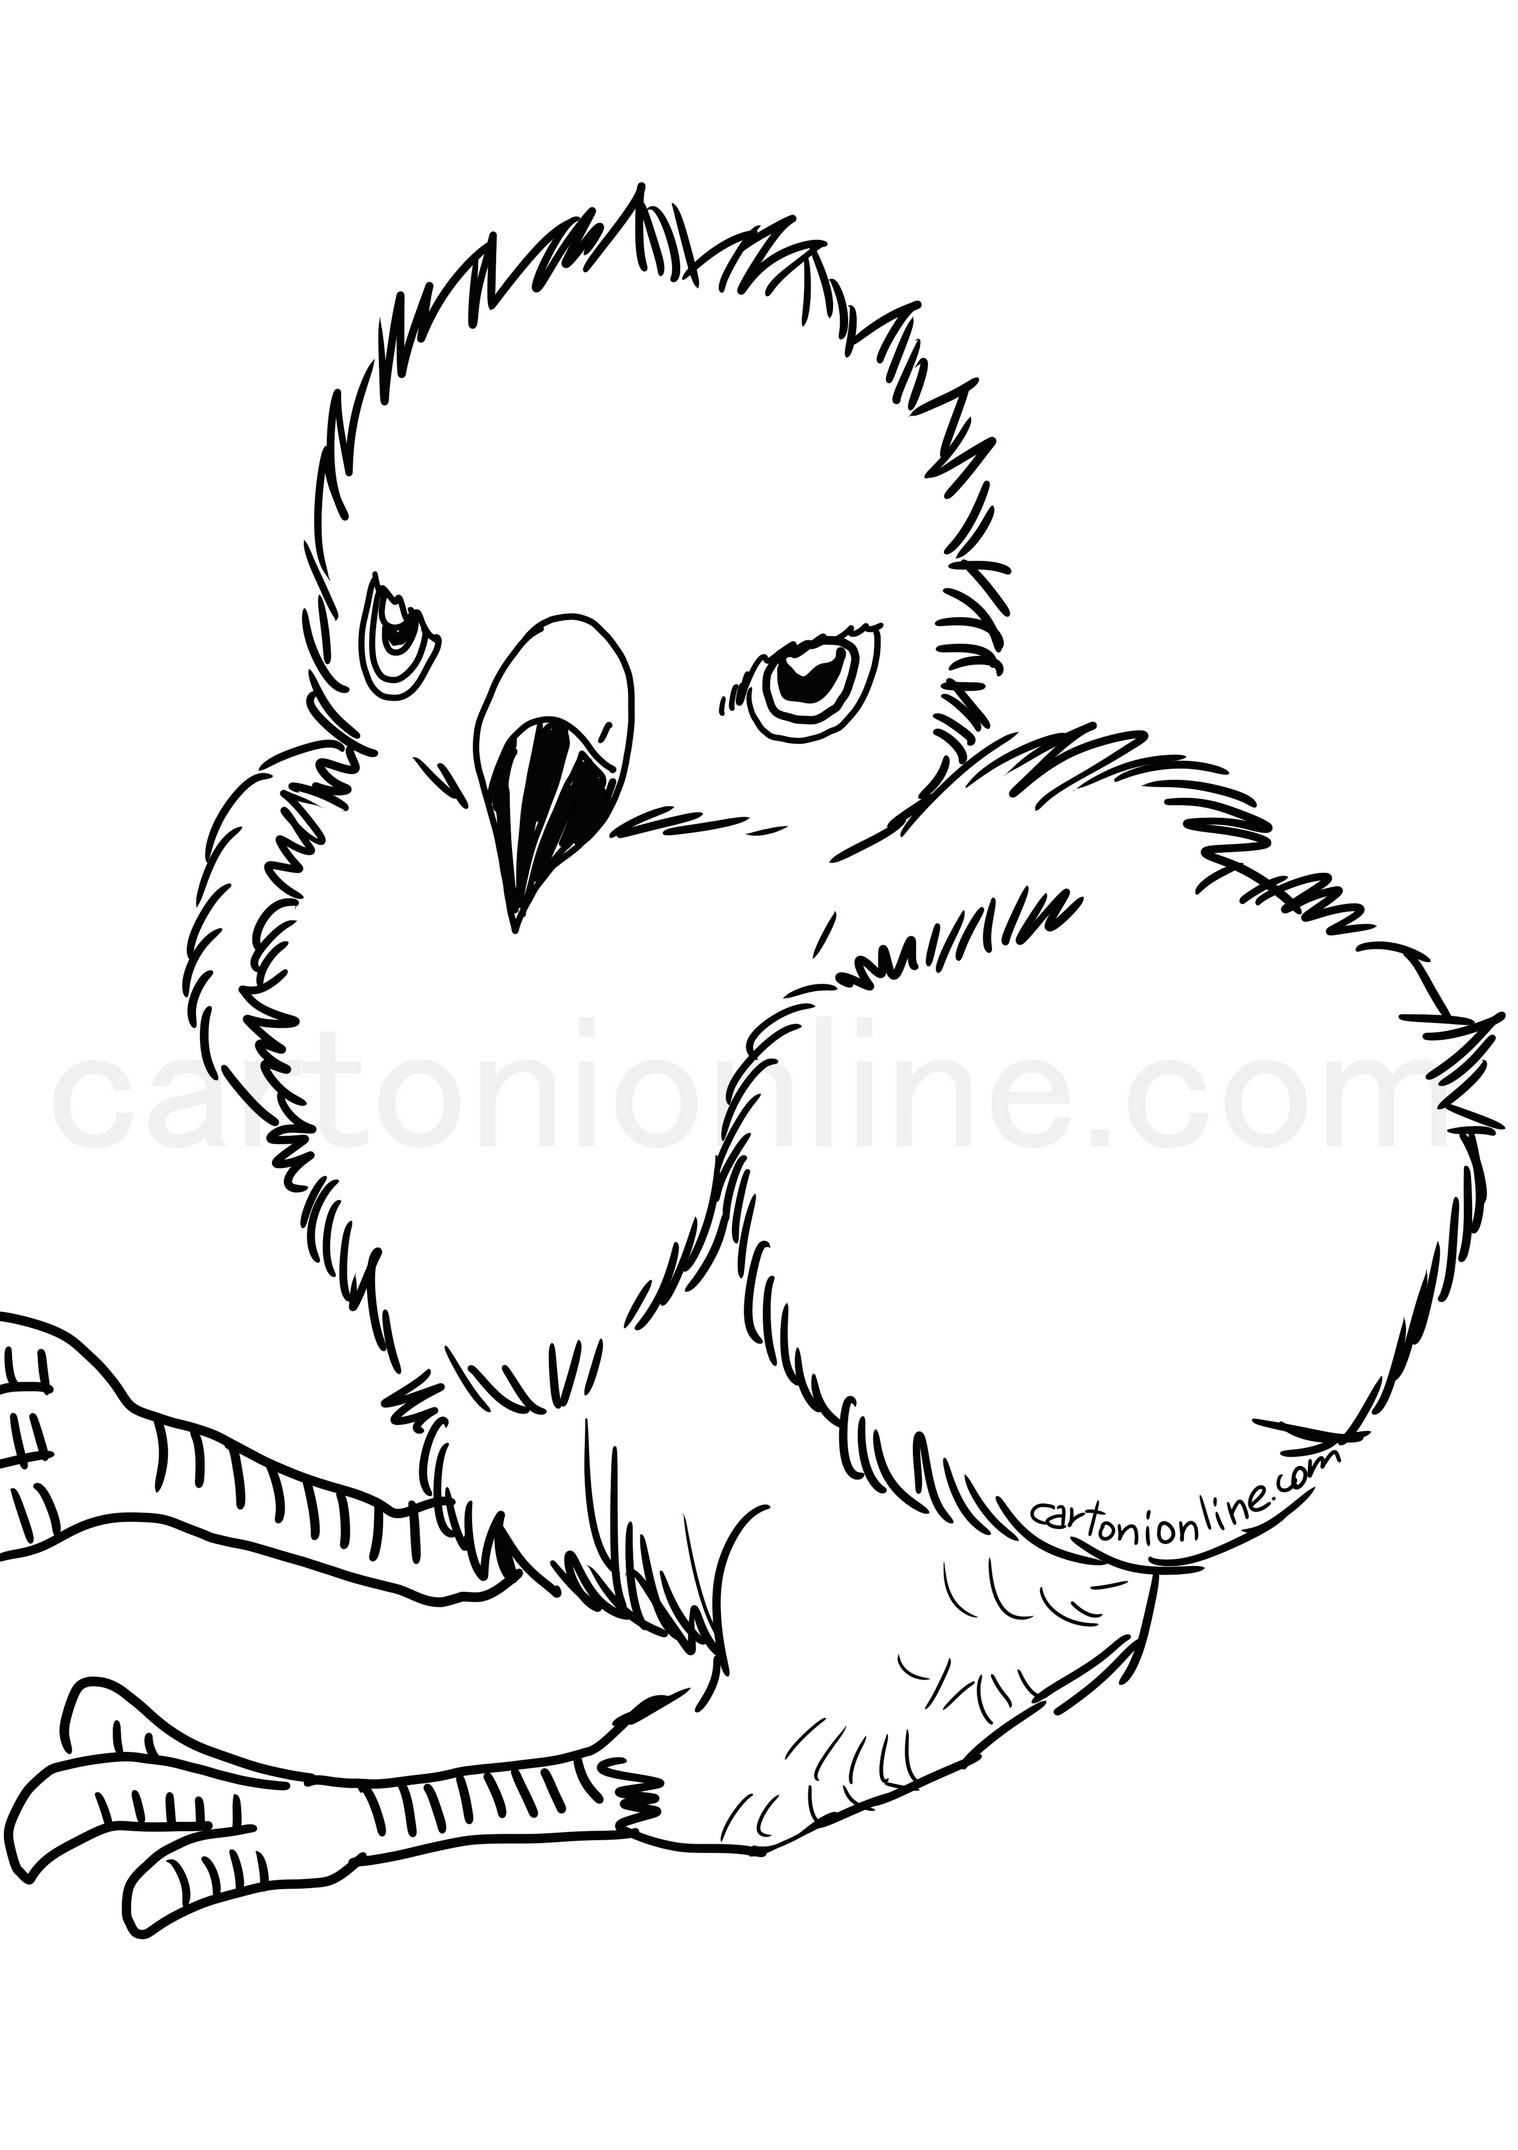 Hawk chick coloring page